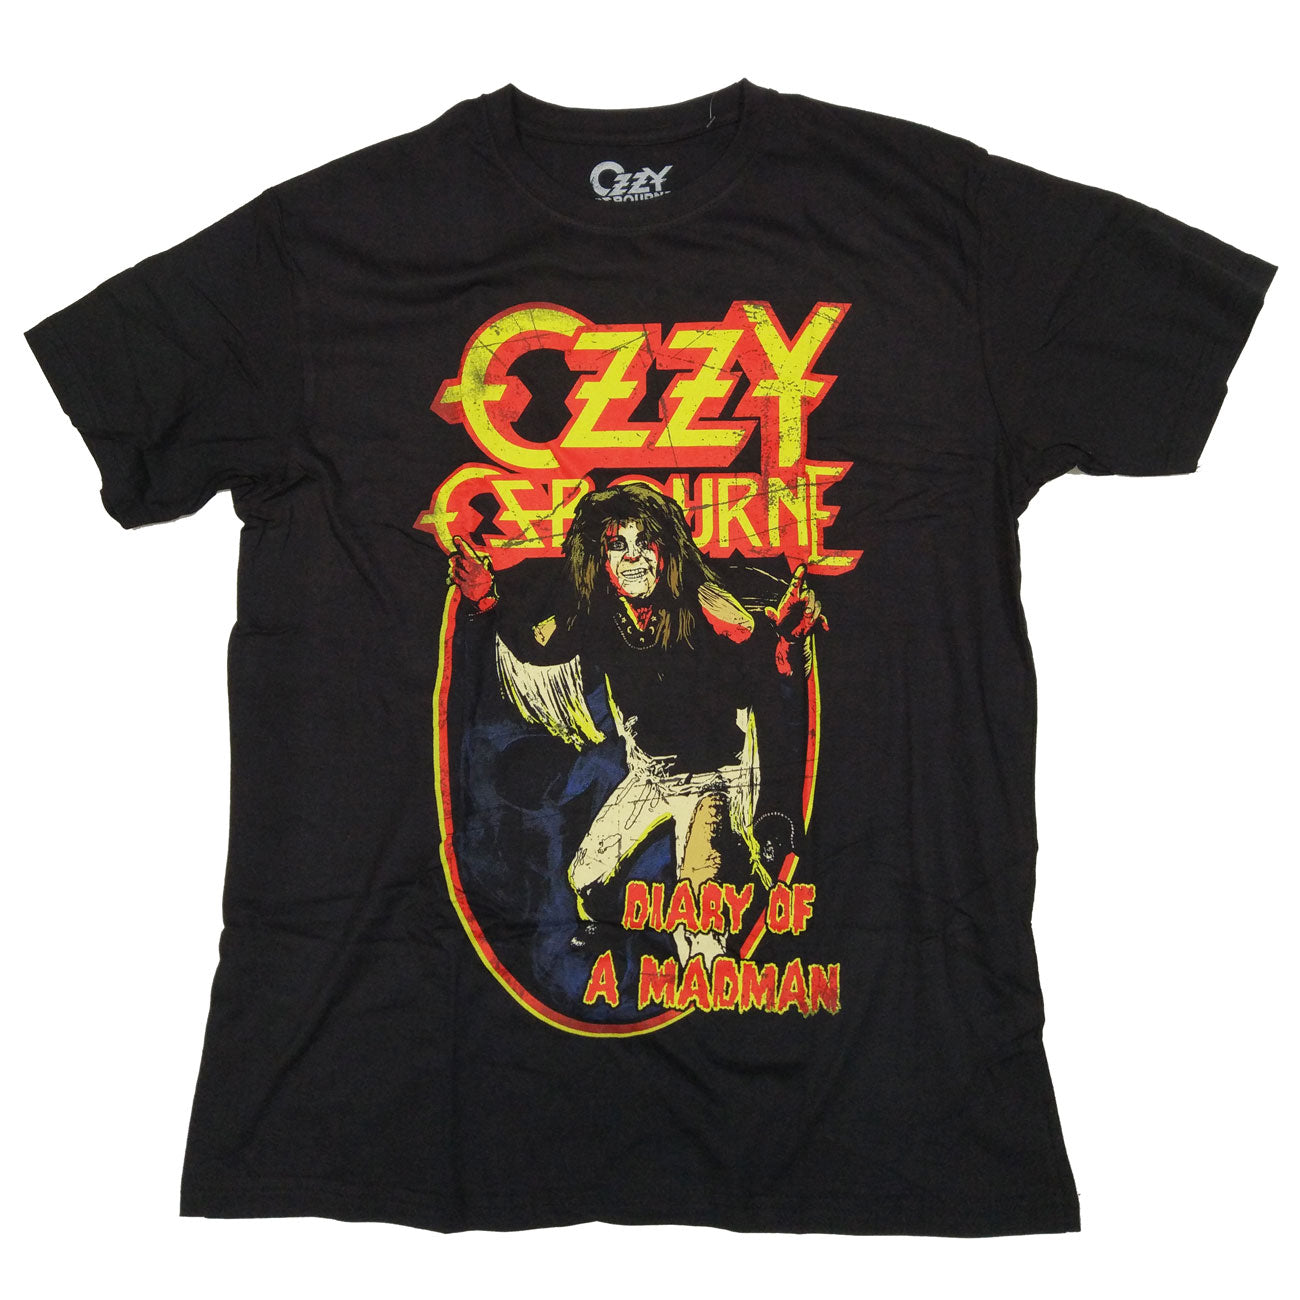 Ozzy Osborne T Shirt - Diary Of A Madman 100% Official